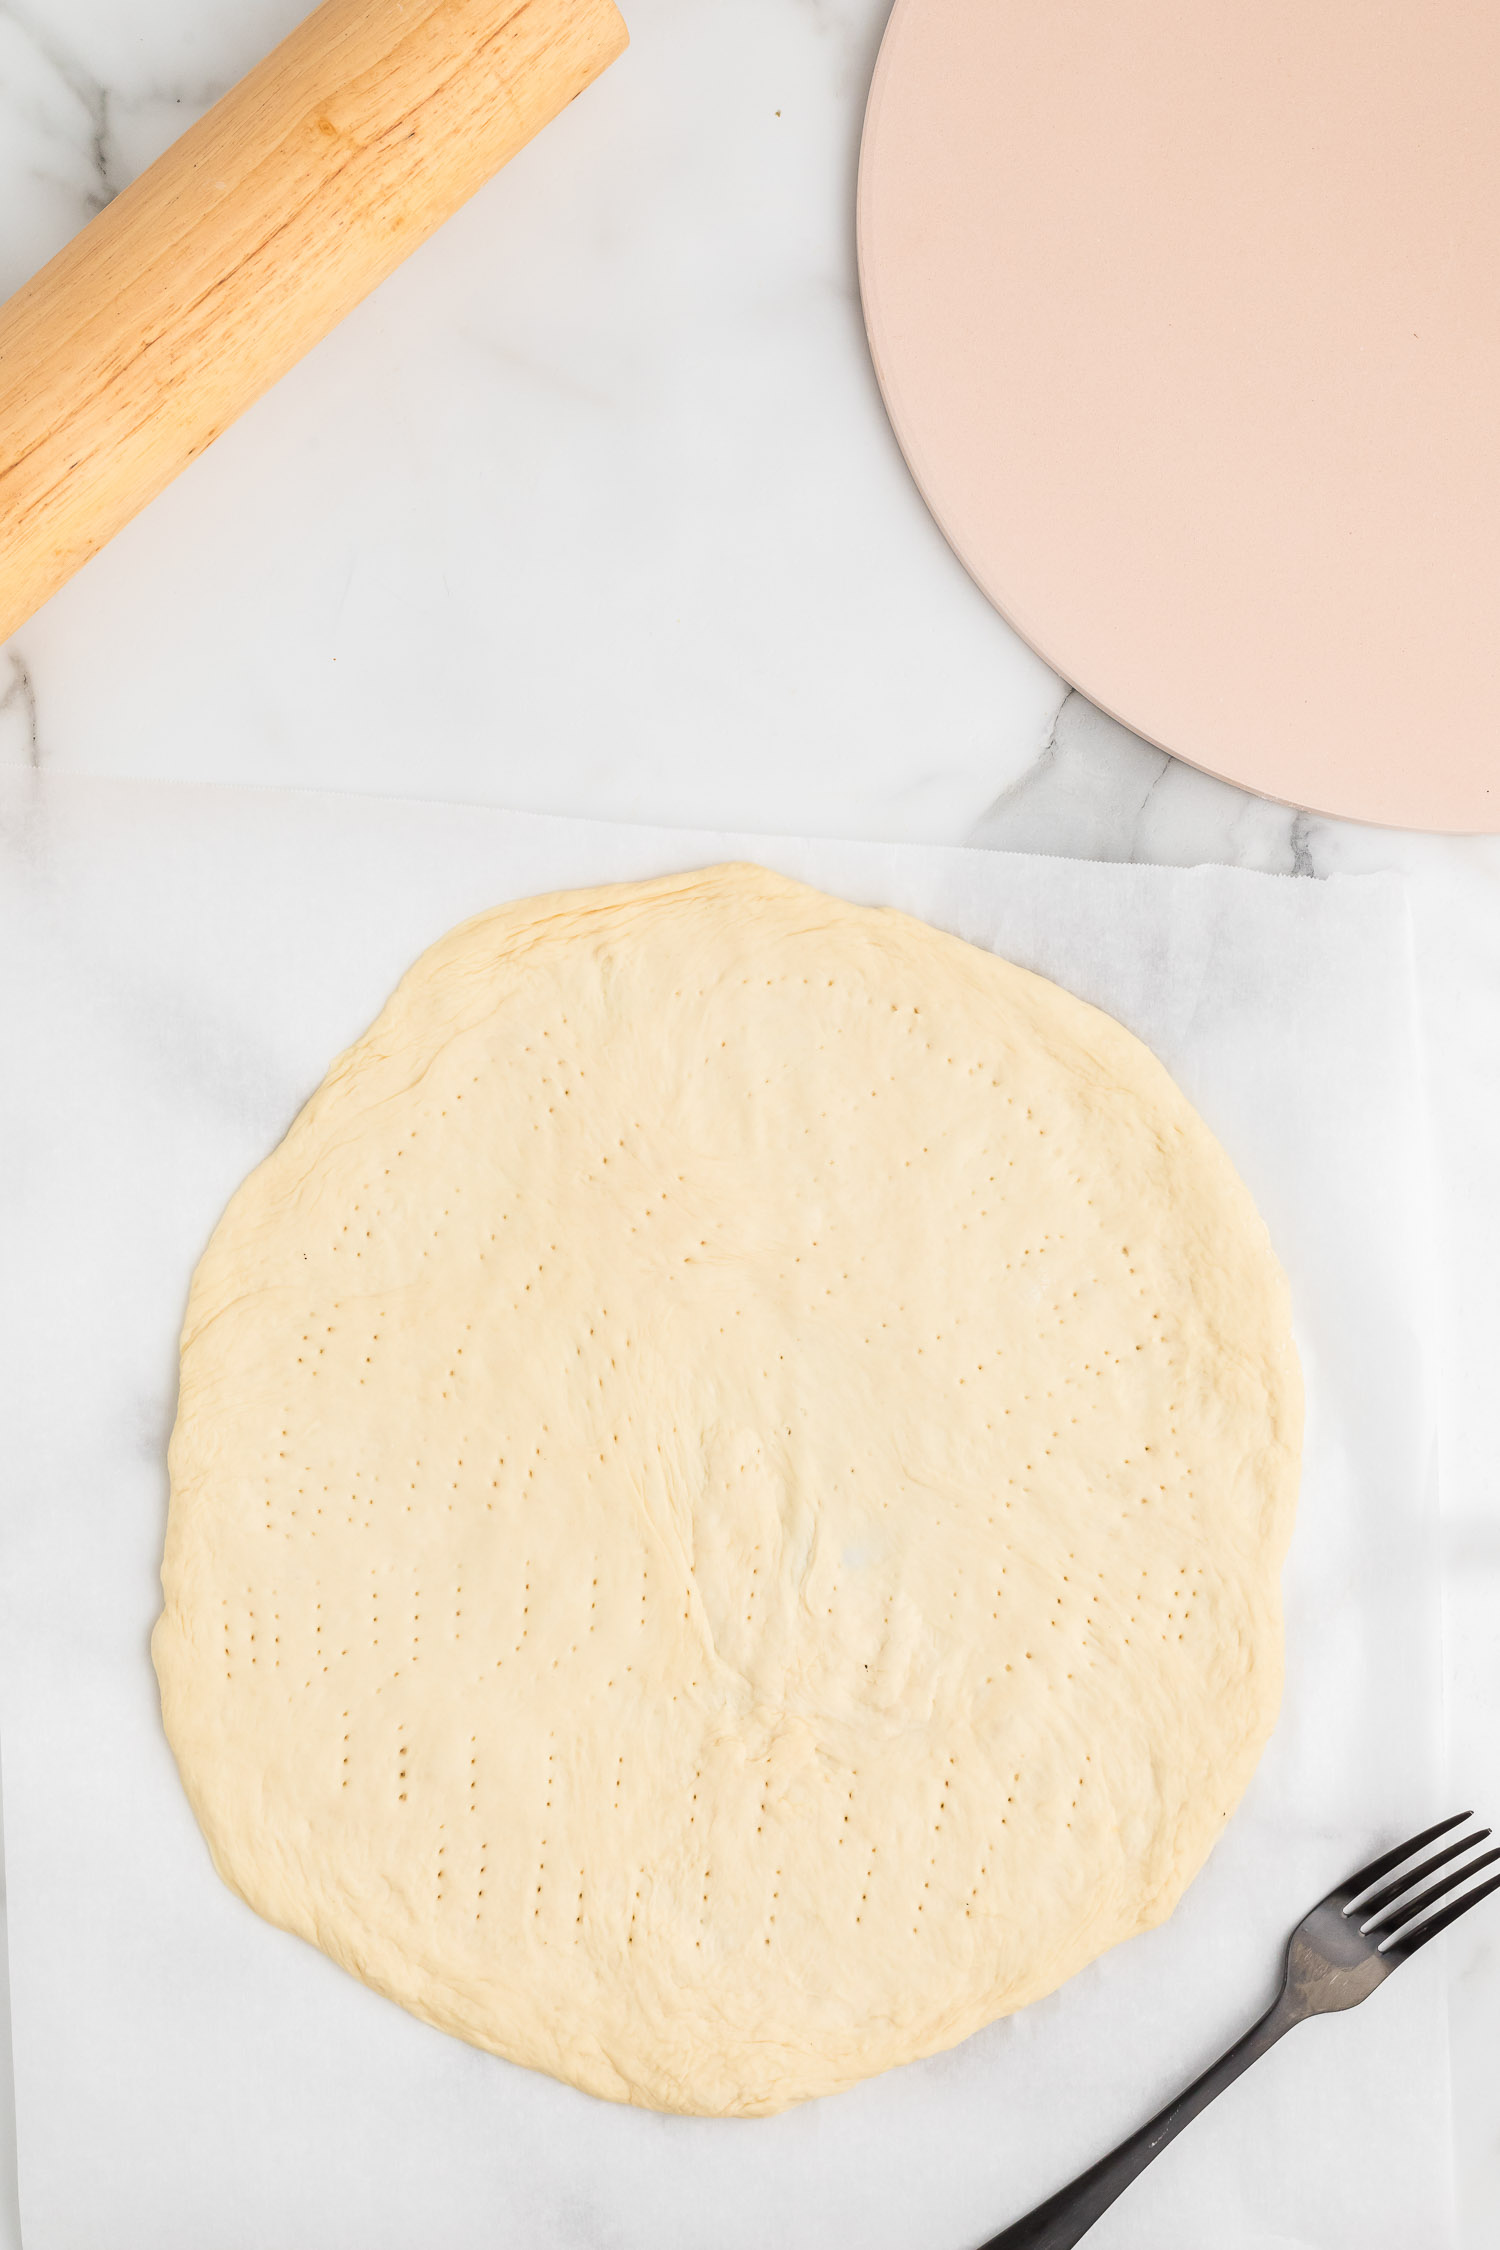 A pizza dough rolled out on parchment paper poked with fork tines with a pizza stone and a black fork on the side.